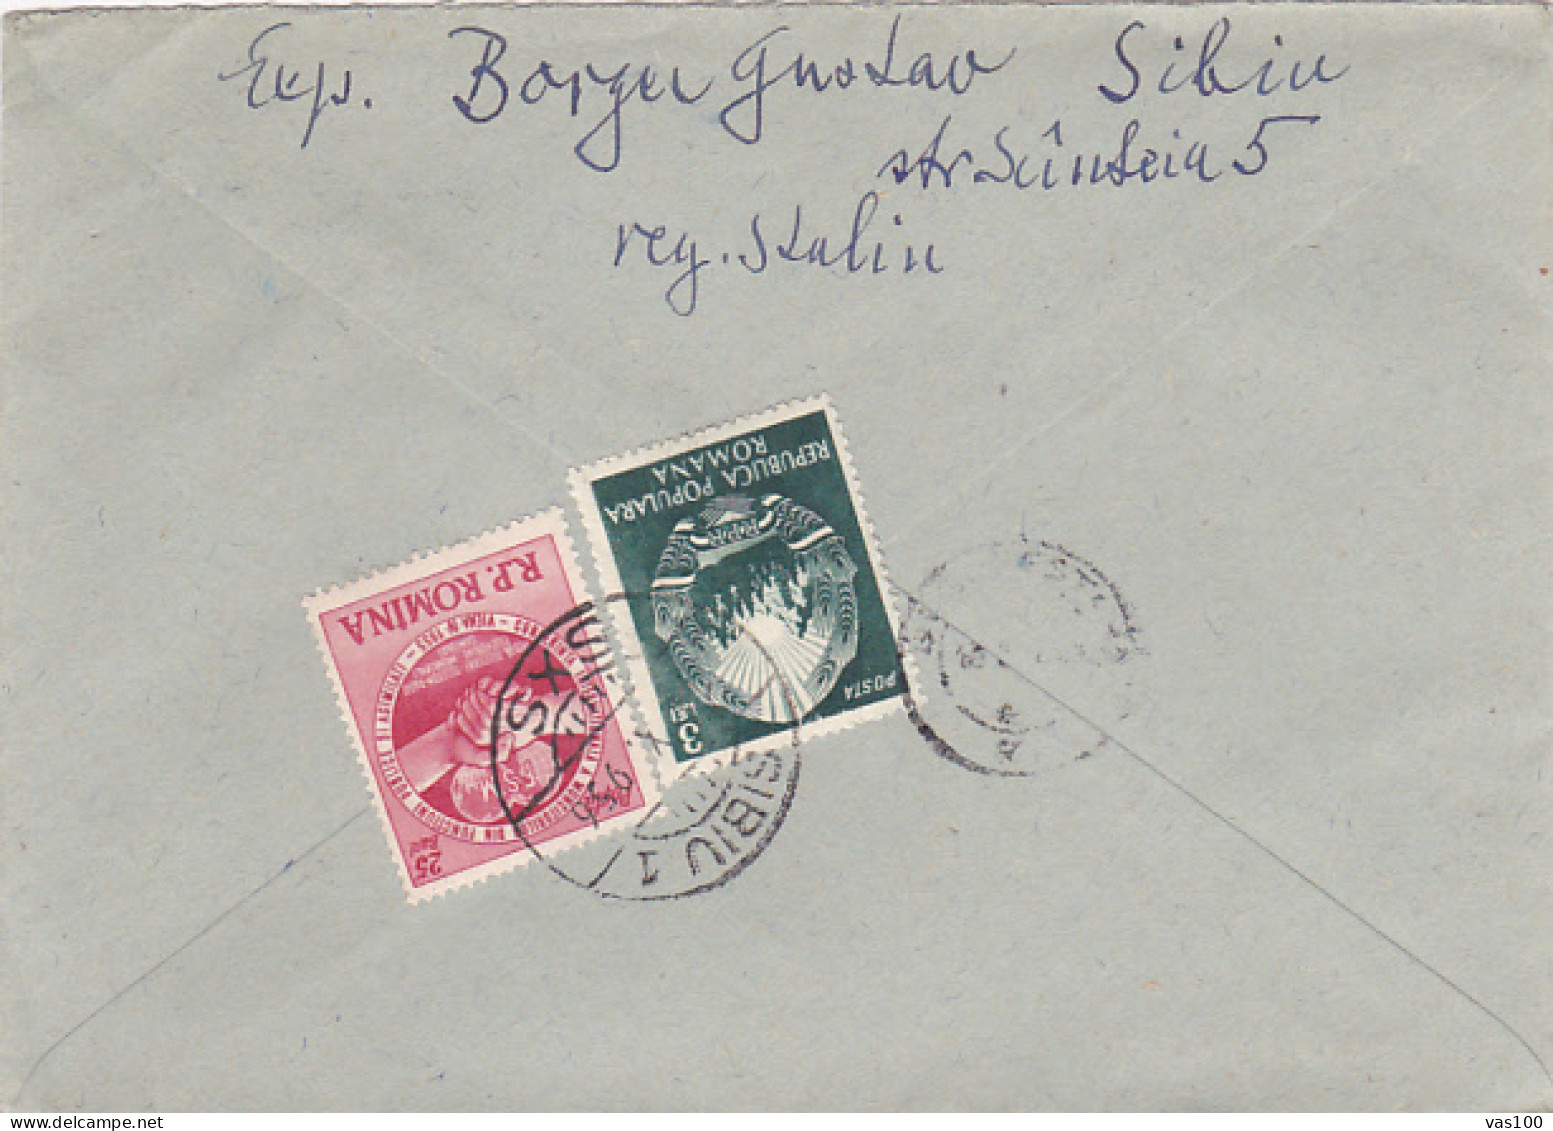 WORKERS CONFERENCE, COAT OF ARMS, STAMPS ON REGISTERED COVER, 1956, ROMANIA - Covers & Documents